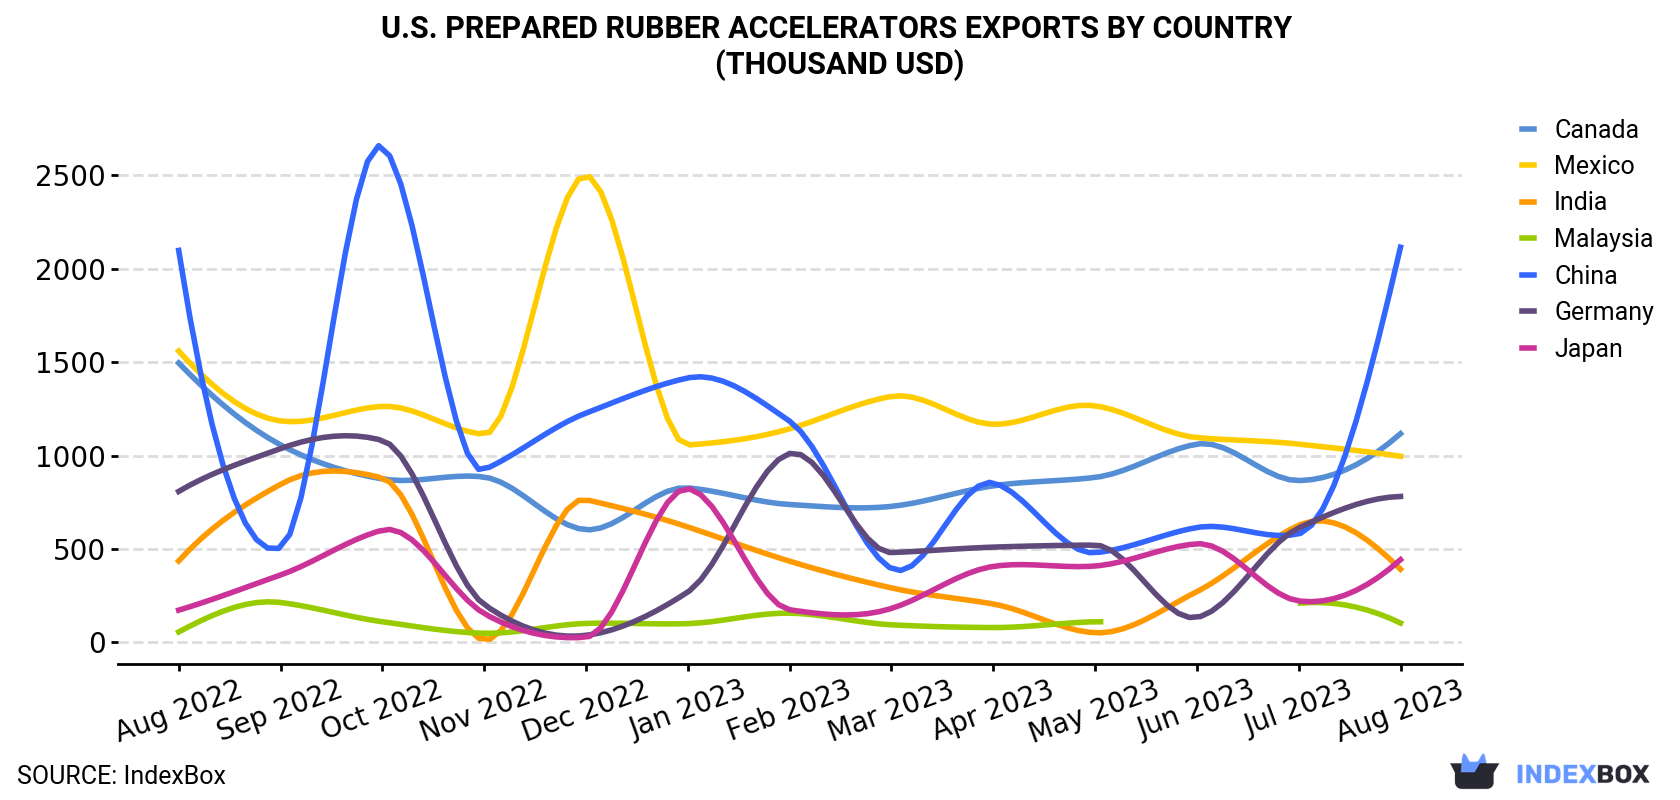 U.S. Prepared Rubber Accelerators Exports By Country (Thousand USD)